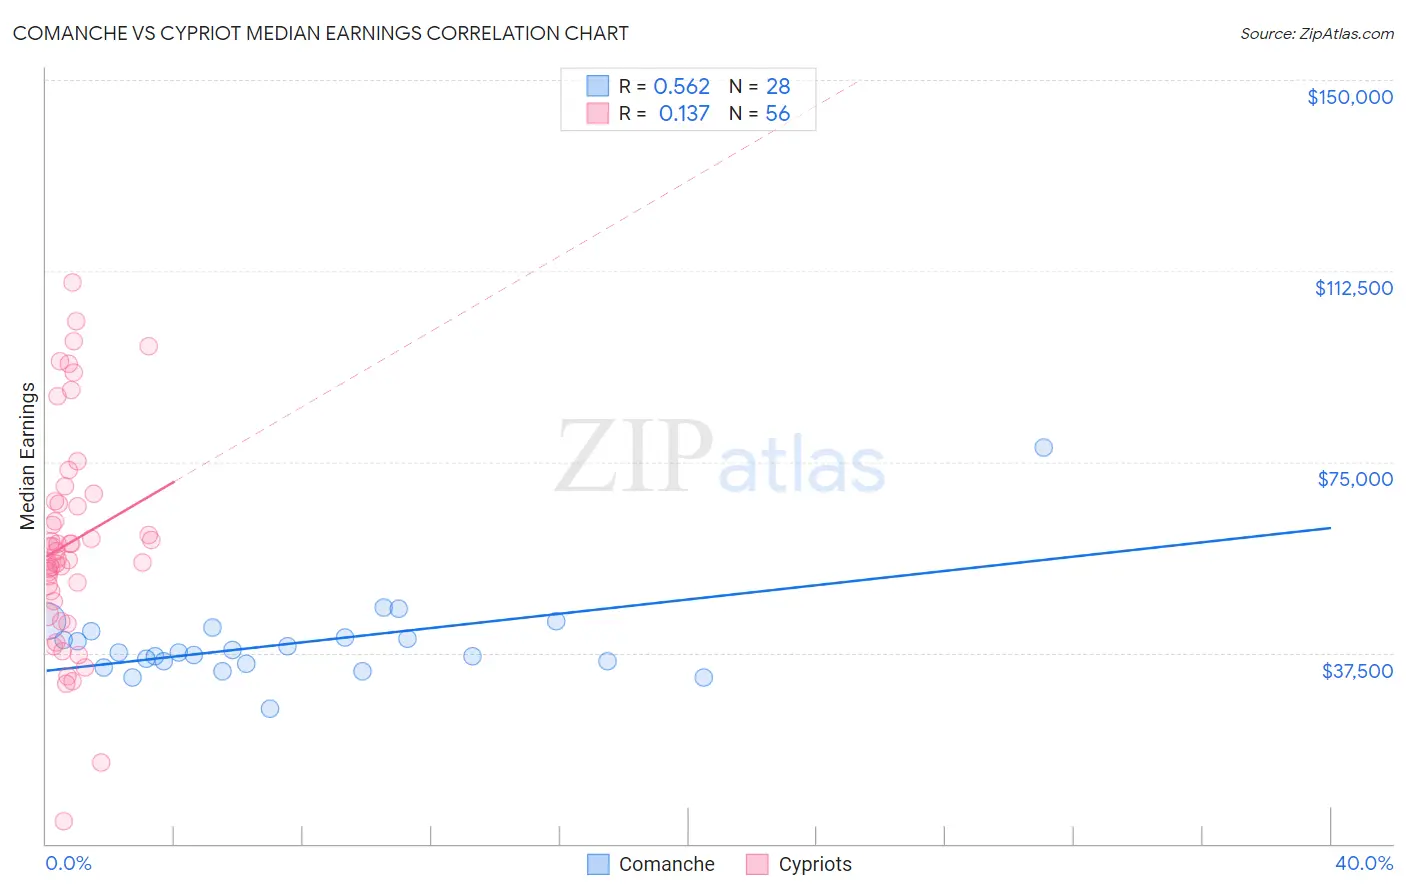 Comanche vs Cypriot Median Earnings